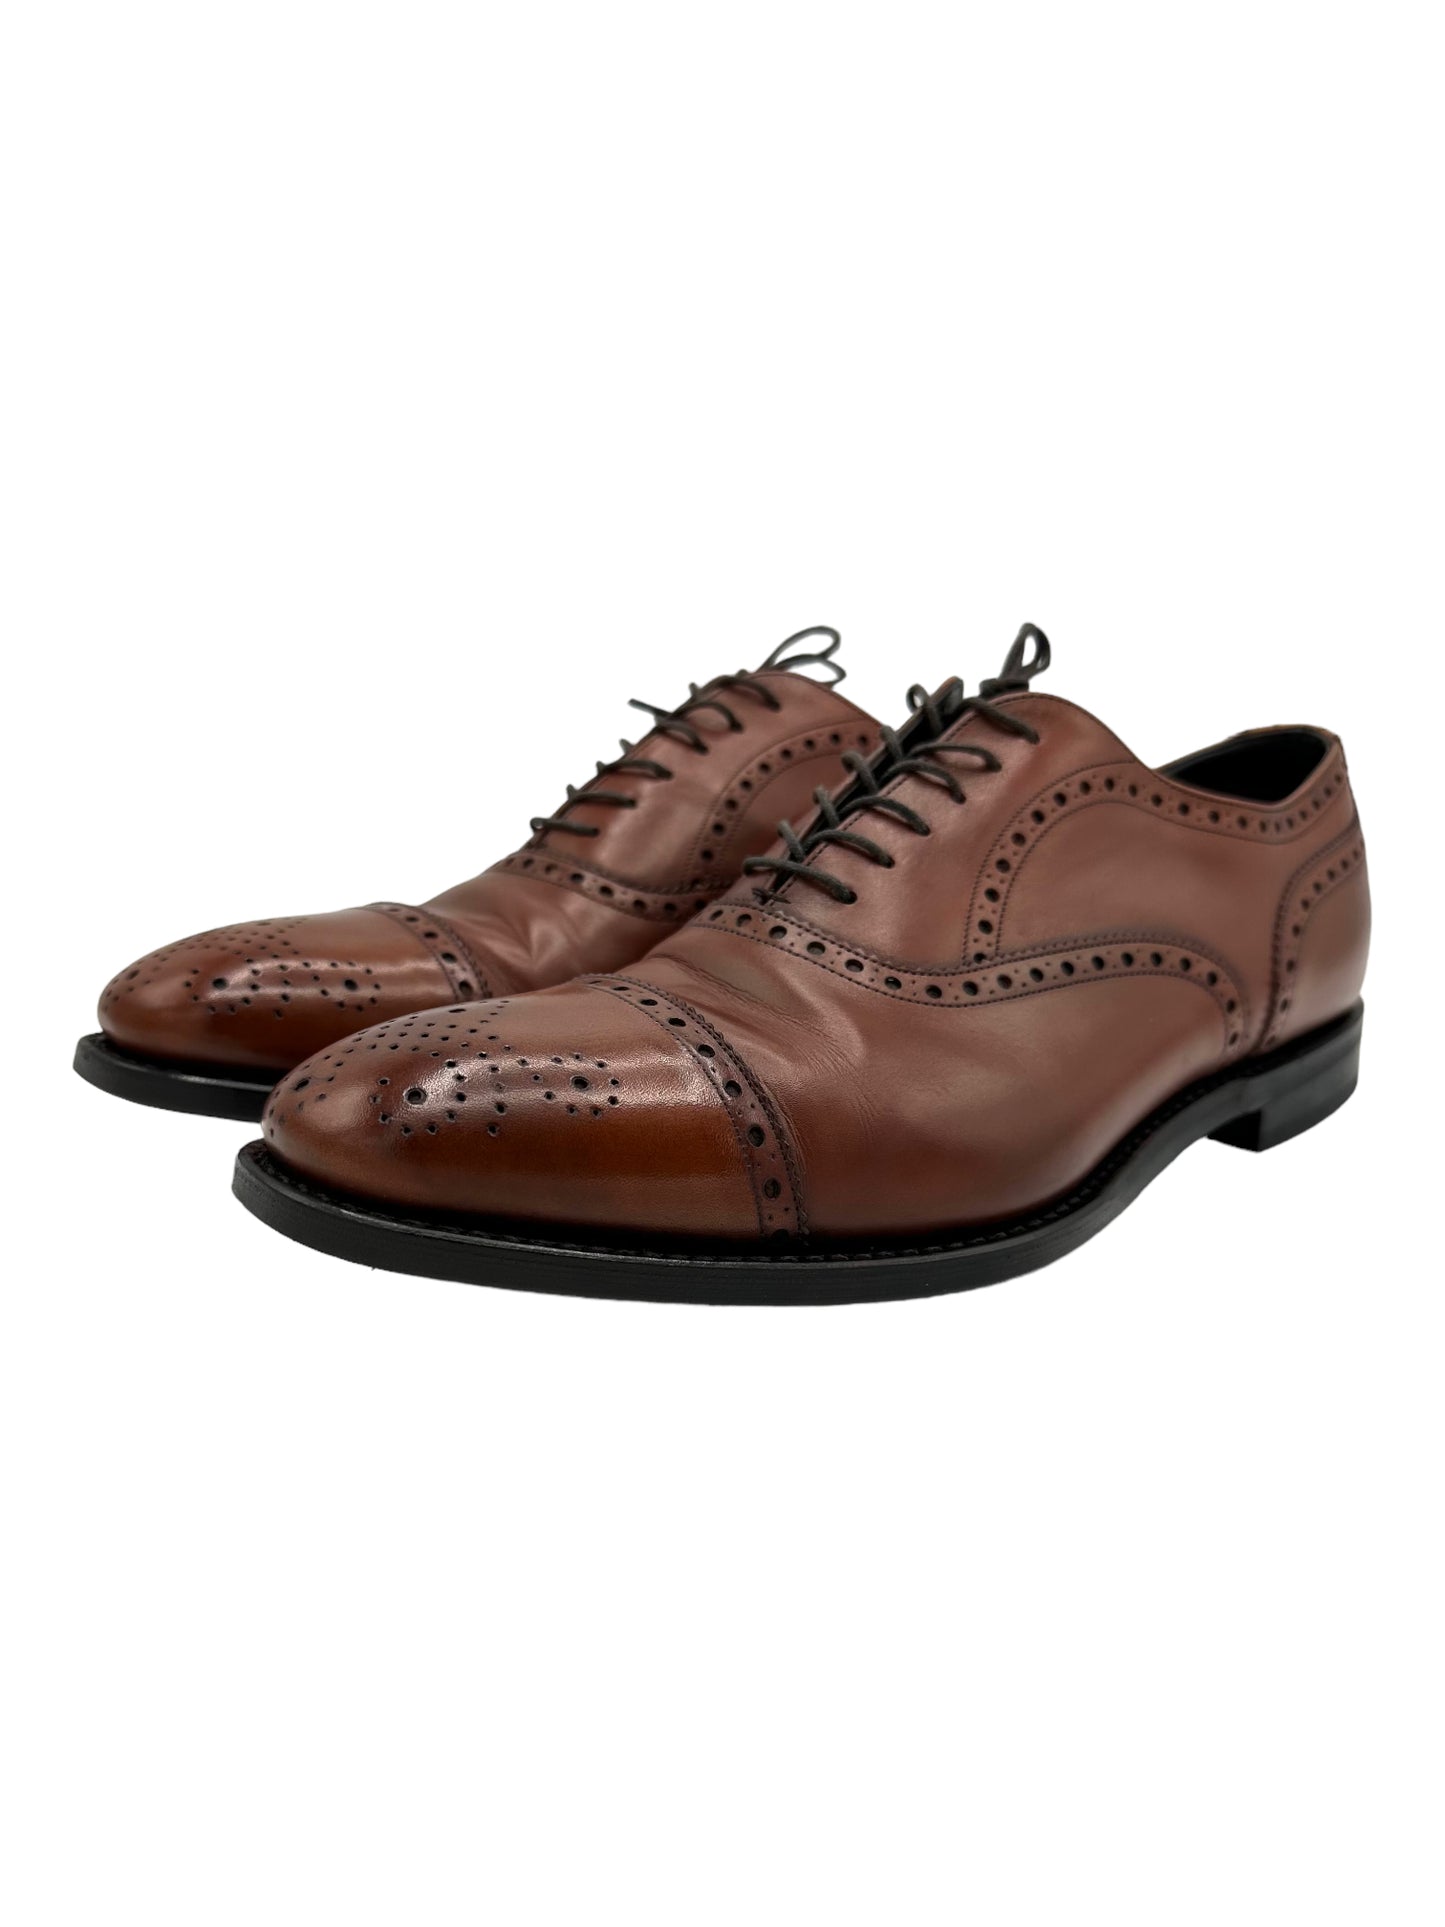 Church's Diplomat 173 Calf Leather Oxford Shoes